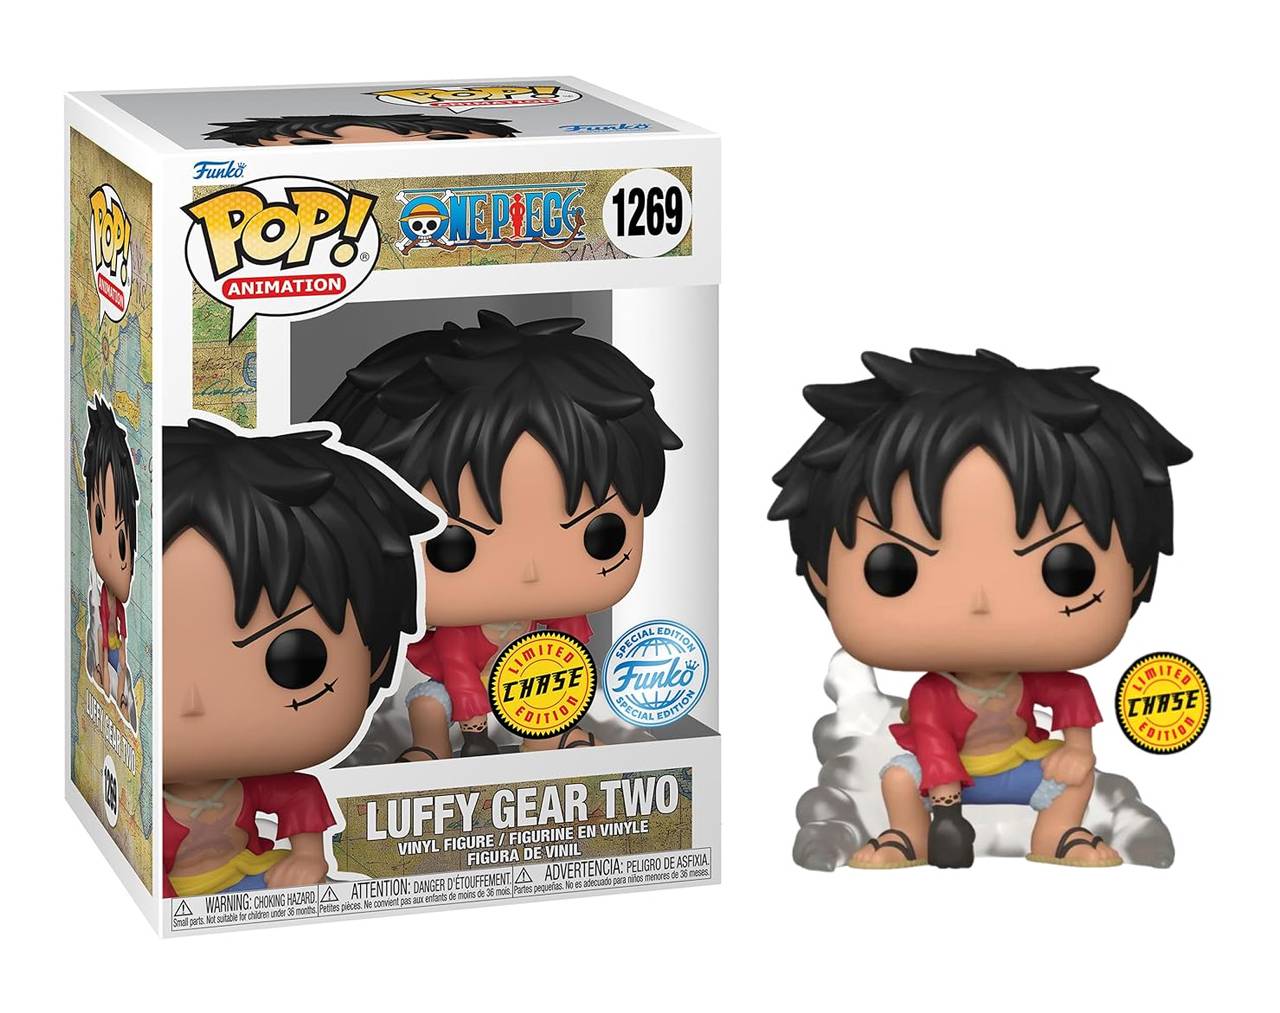 Luffy Gear Two (Limited Chase Edition) - One Piece Pop! Vinyl